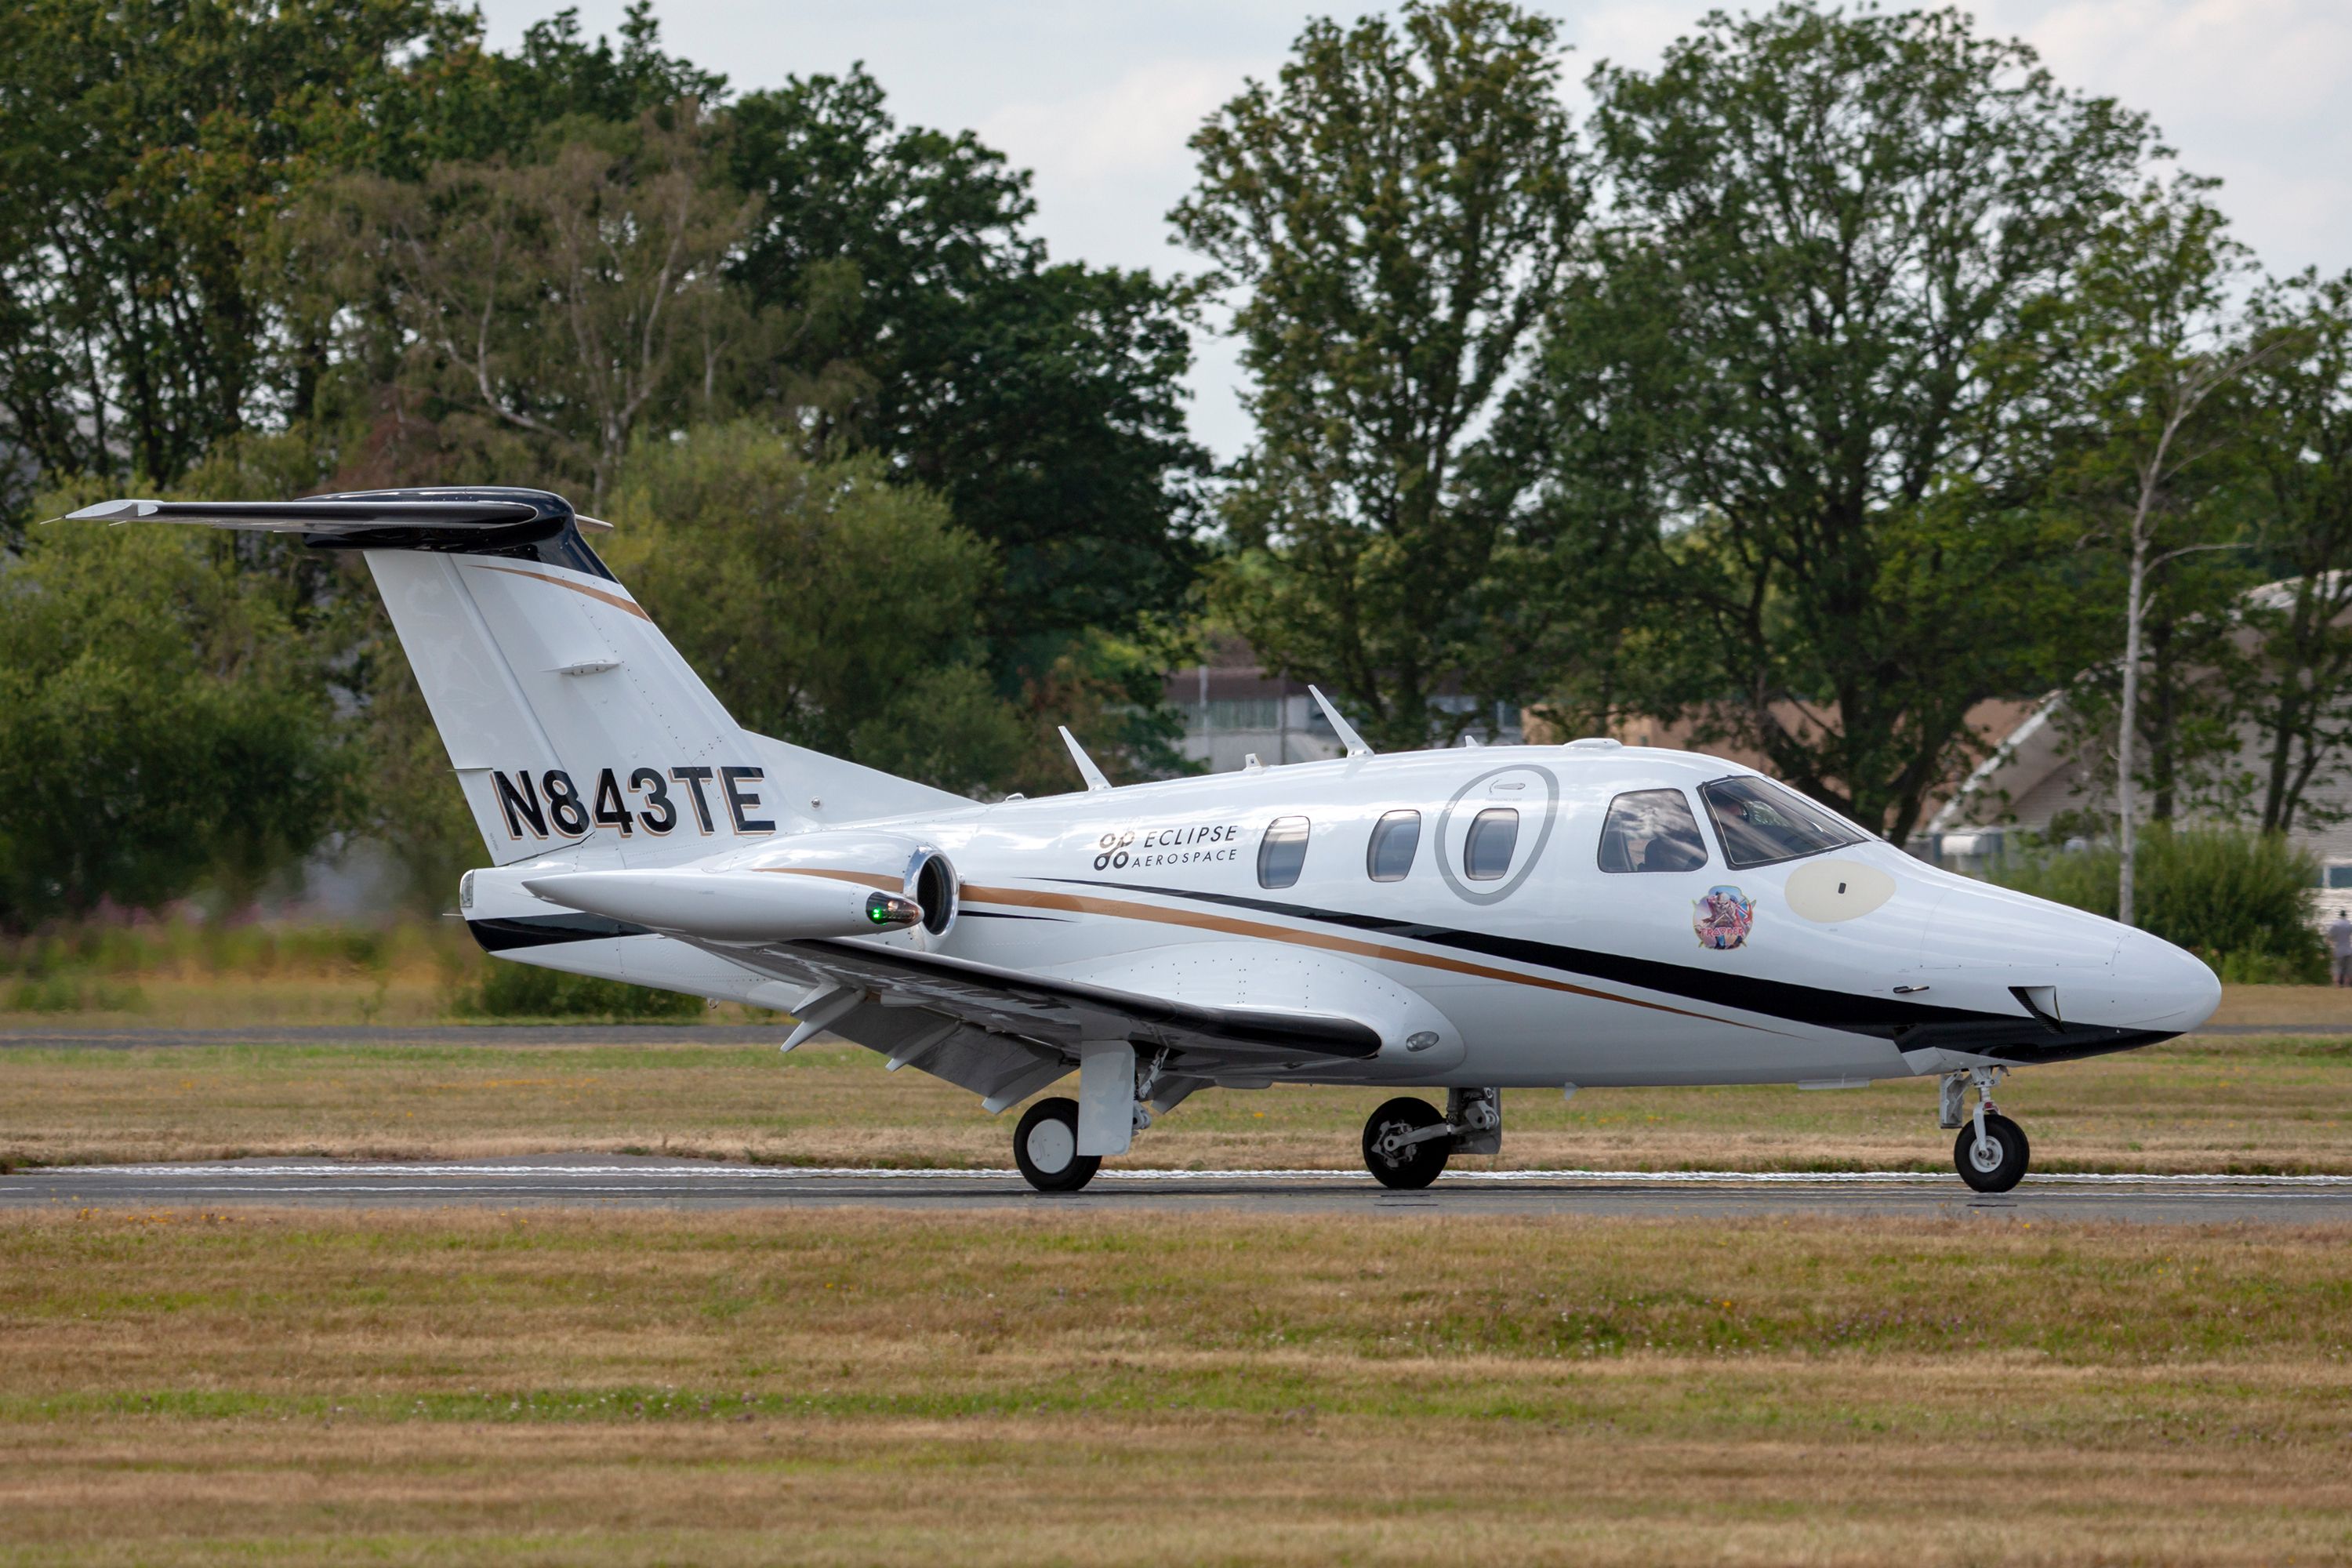 An Eclipse 500 business jet on an airport apron.